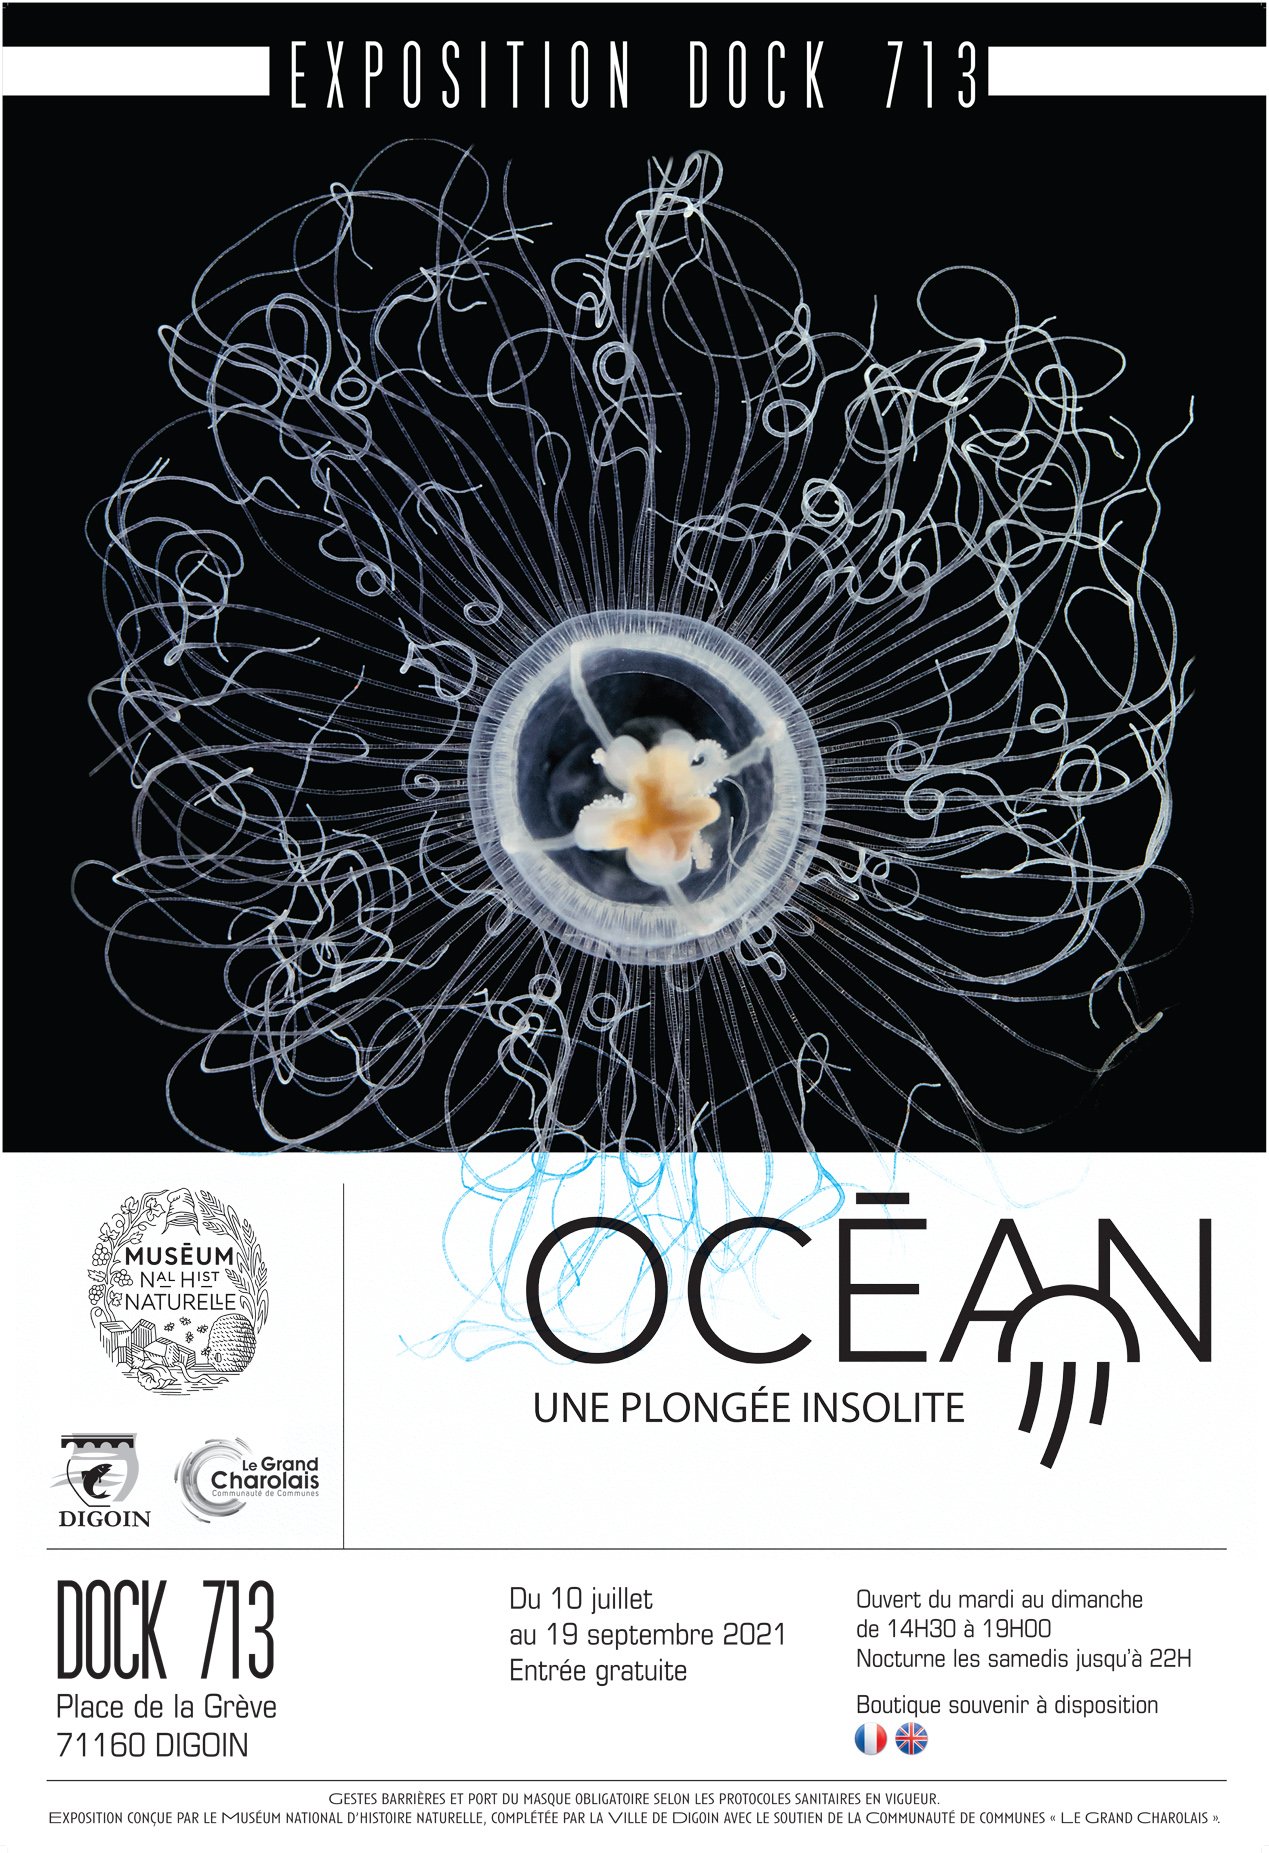 DIGOIN: “Ocean, Extraordinary Diving”, an exhibition designed by the Museum of Natural History in Paris